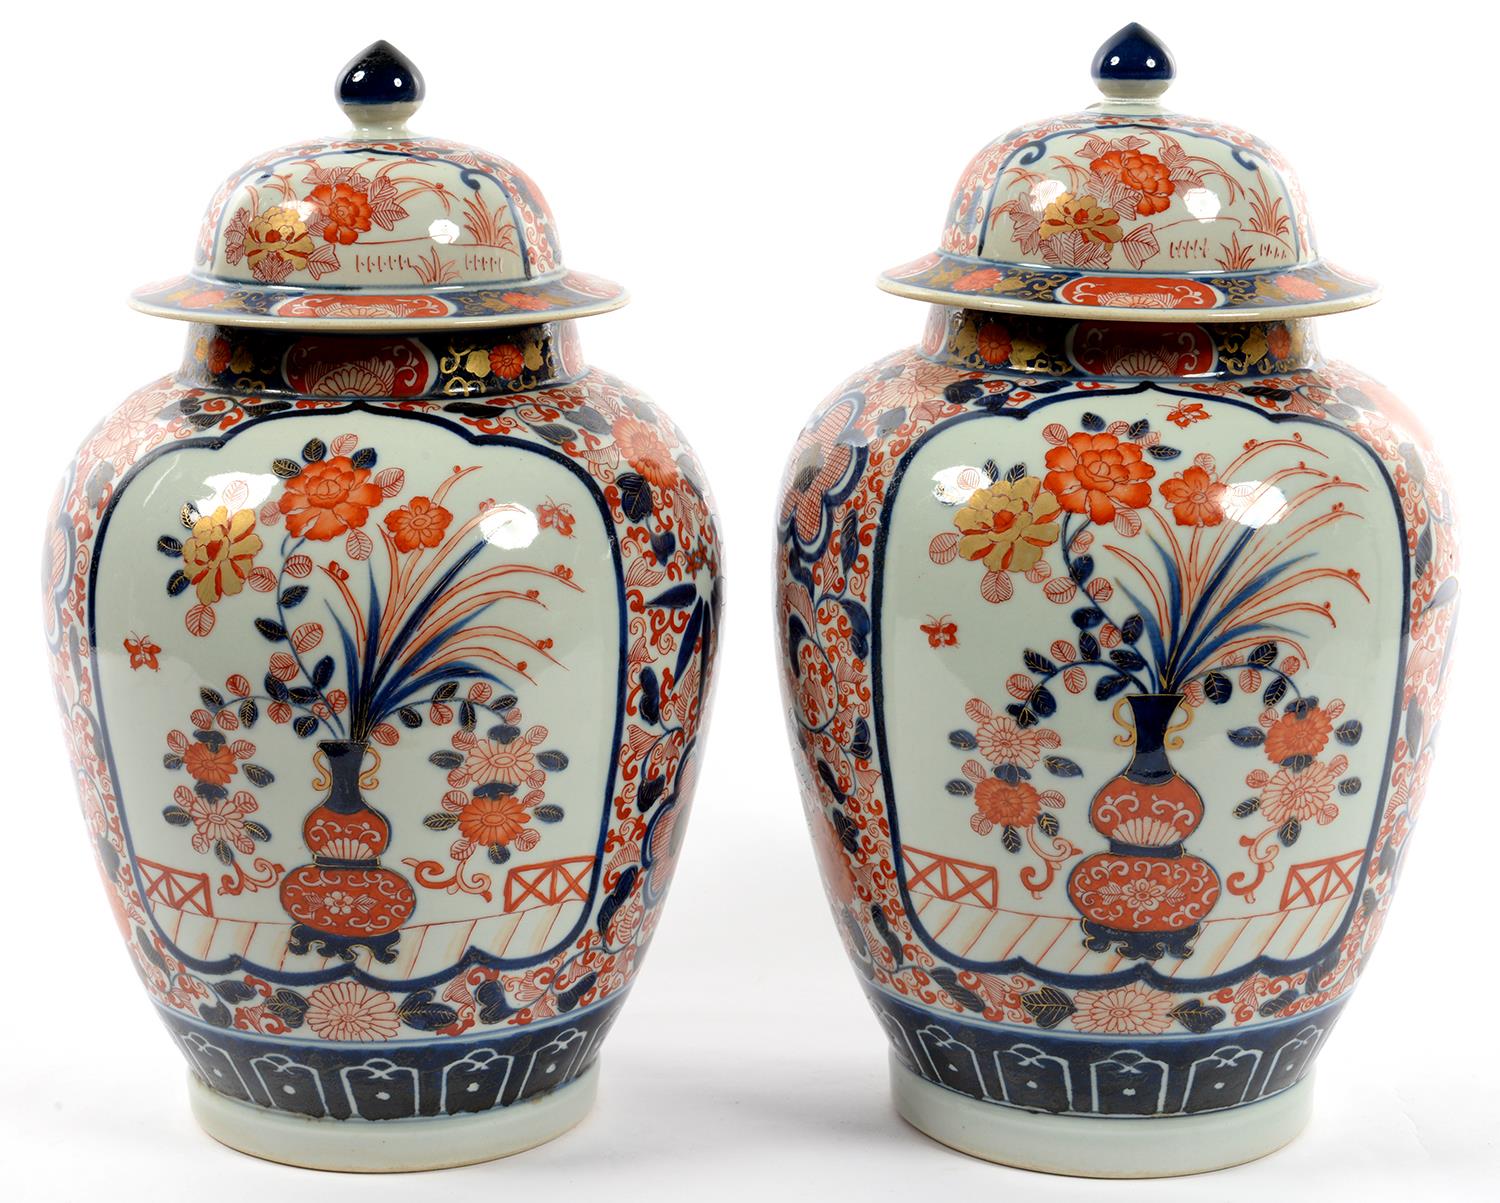 A PAIR OF JAPANESE IMARI OVIFORM JARS  AND COVERS, 38CM H, EARLY 20TH C